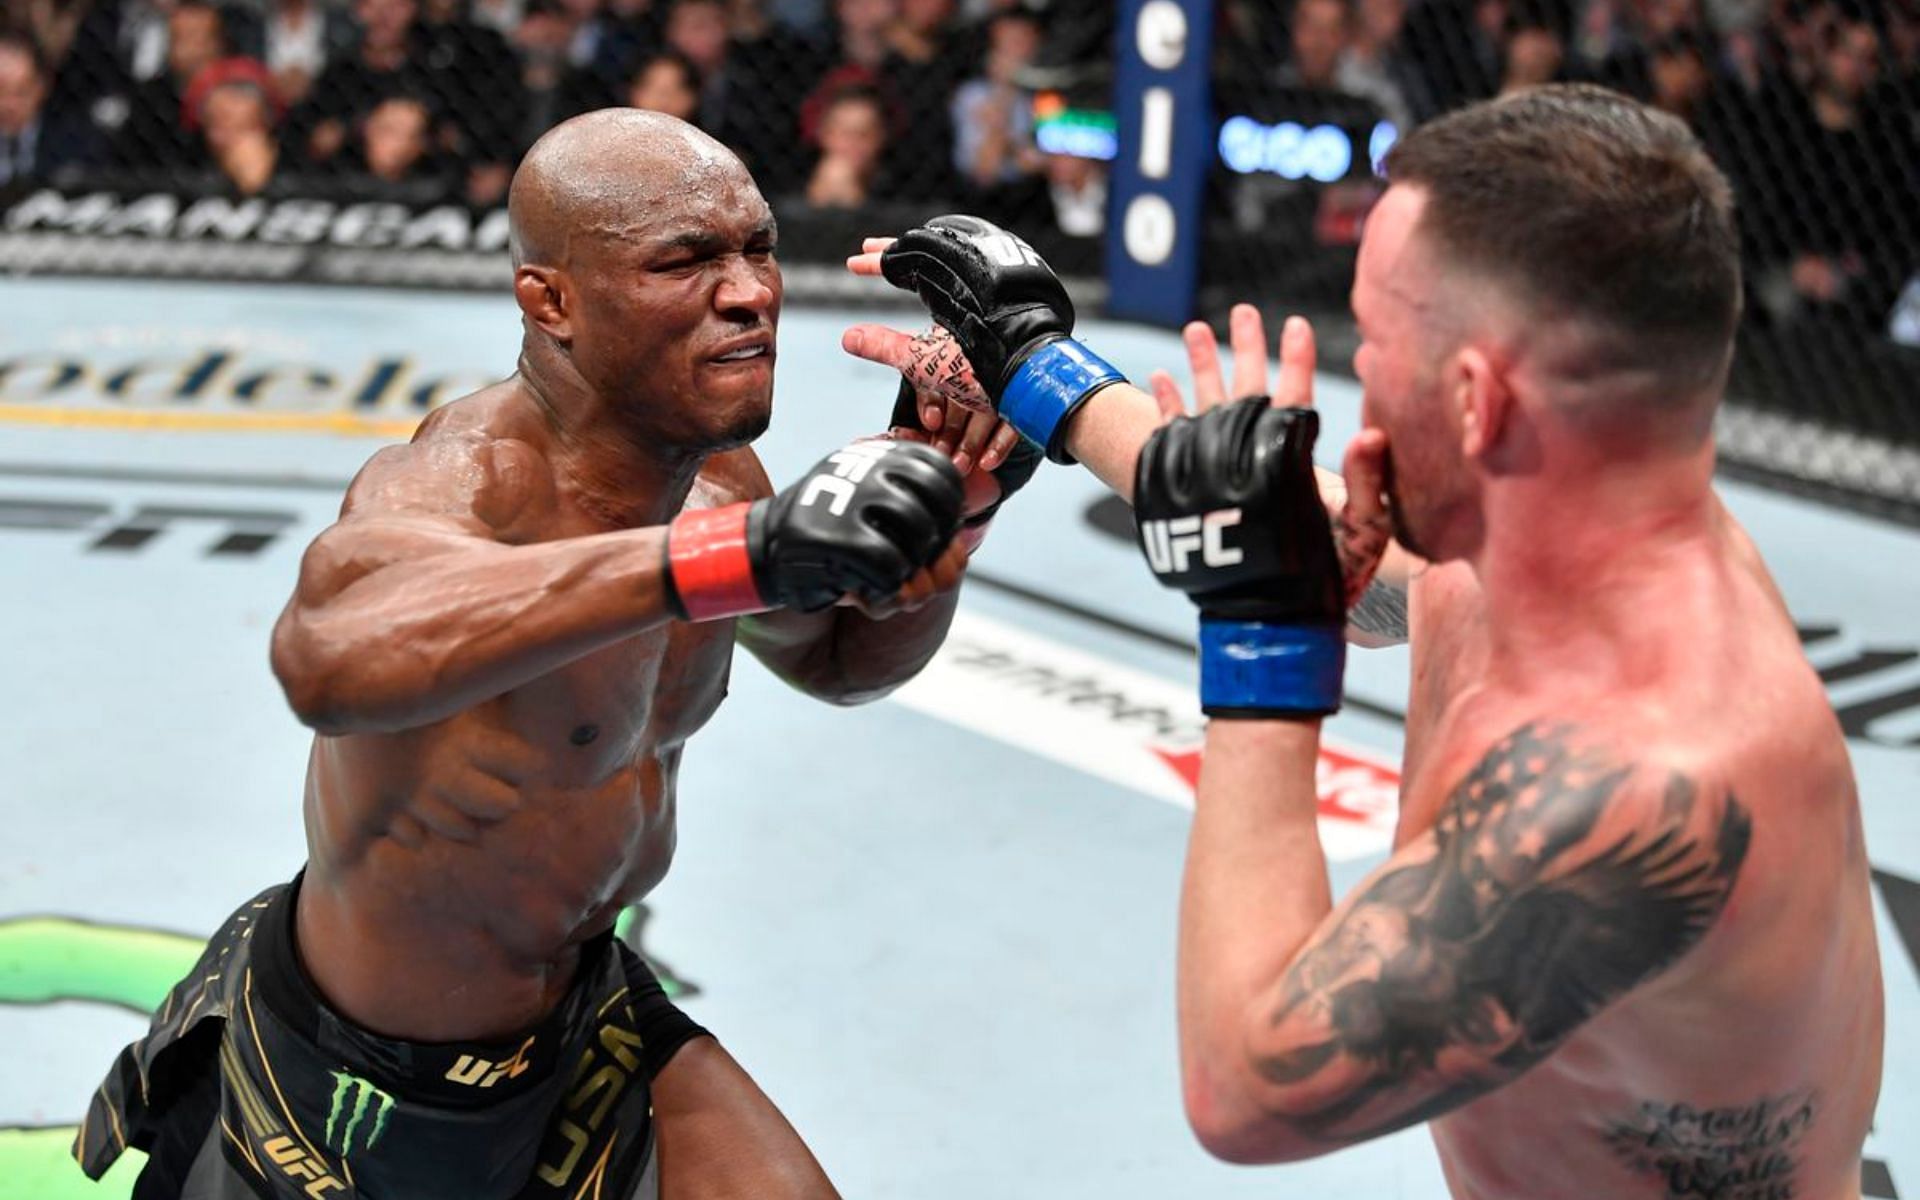 Kamaru Usman picked up his second win over Colby Covington at UFC 268 last night